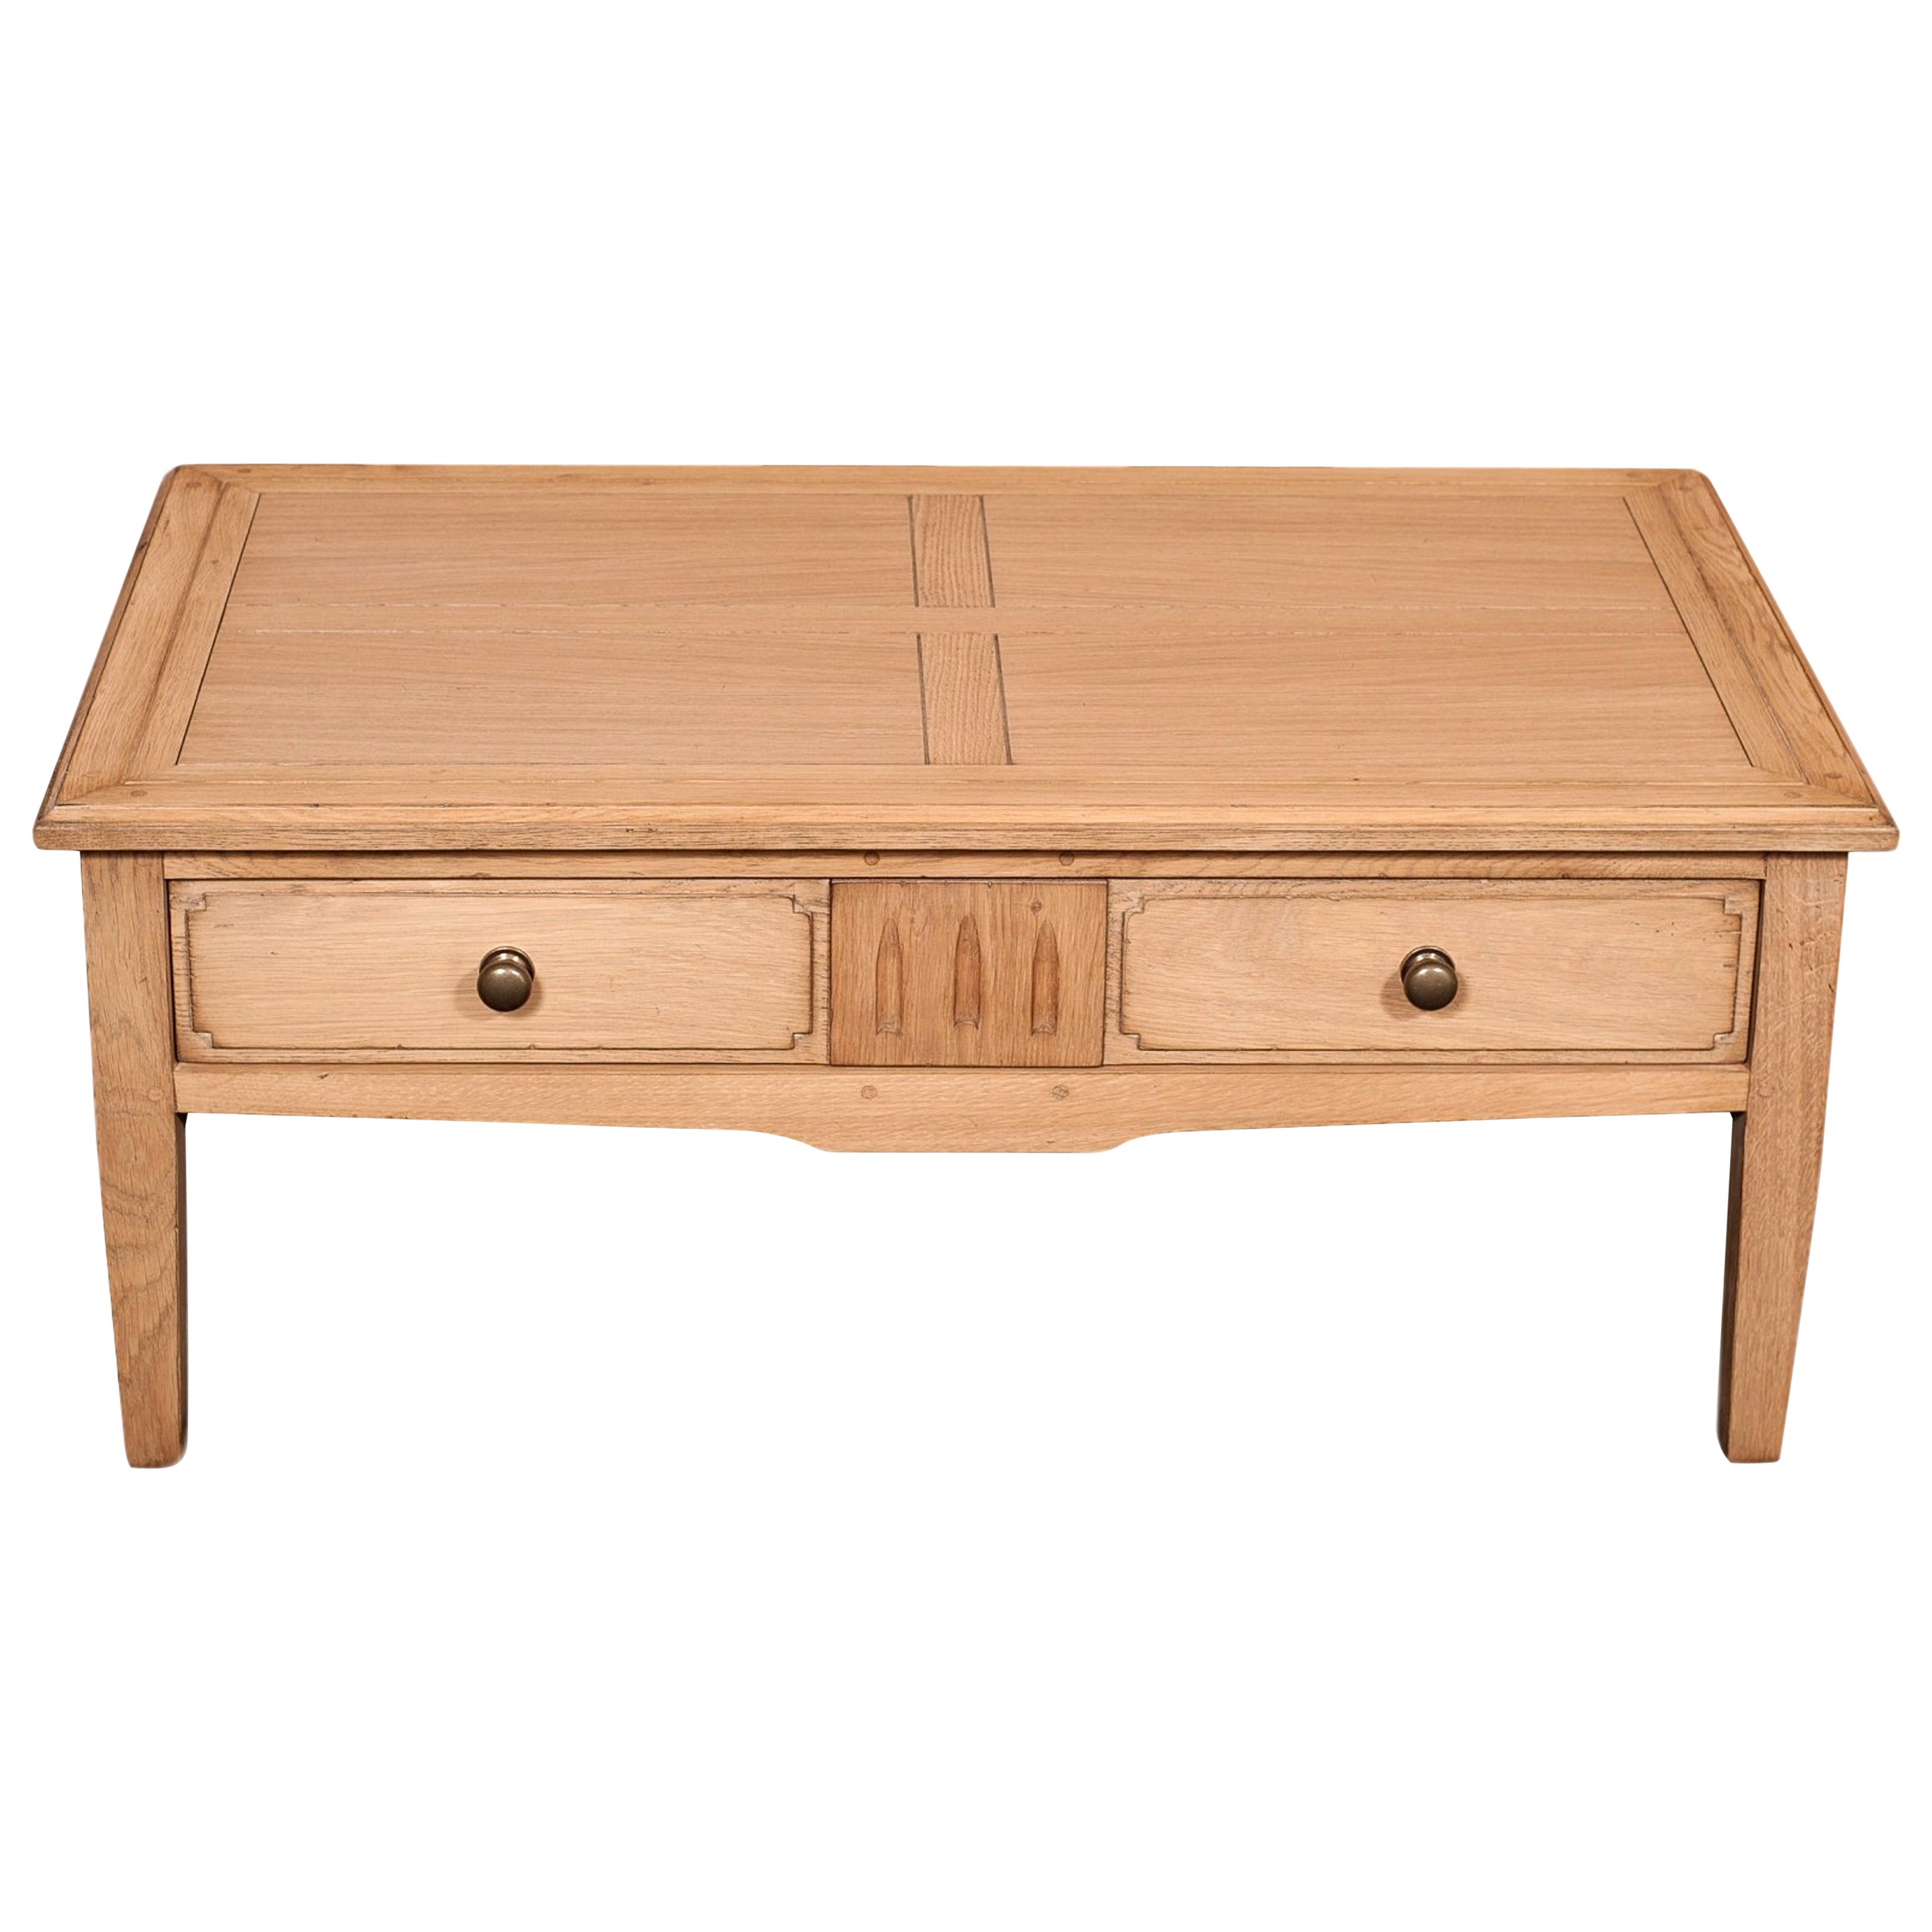 French Directoire Oak Coffee Table, Countryside Style Finish, Drawer For Sale